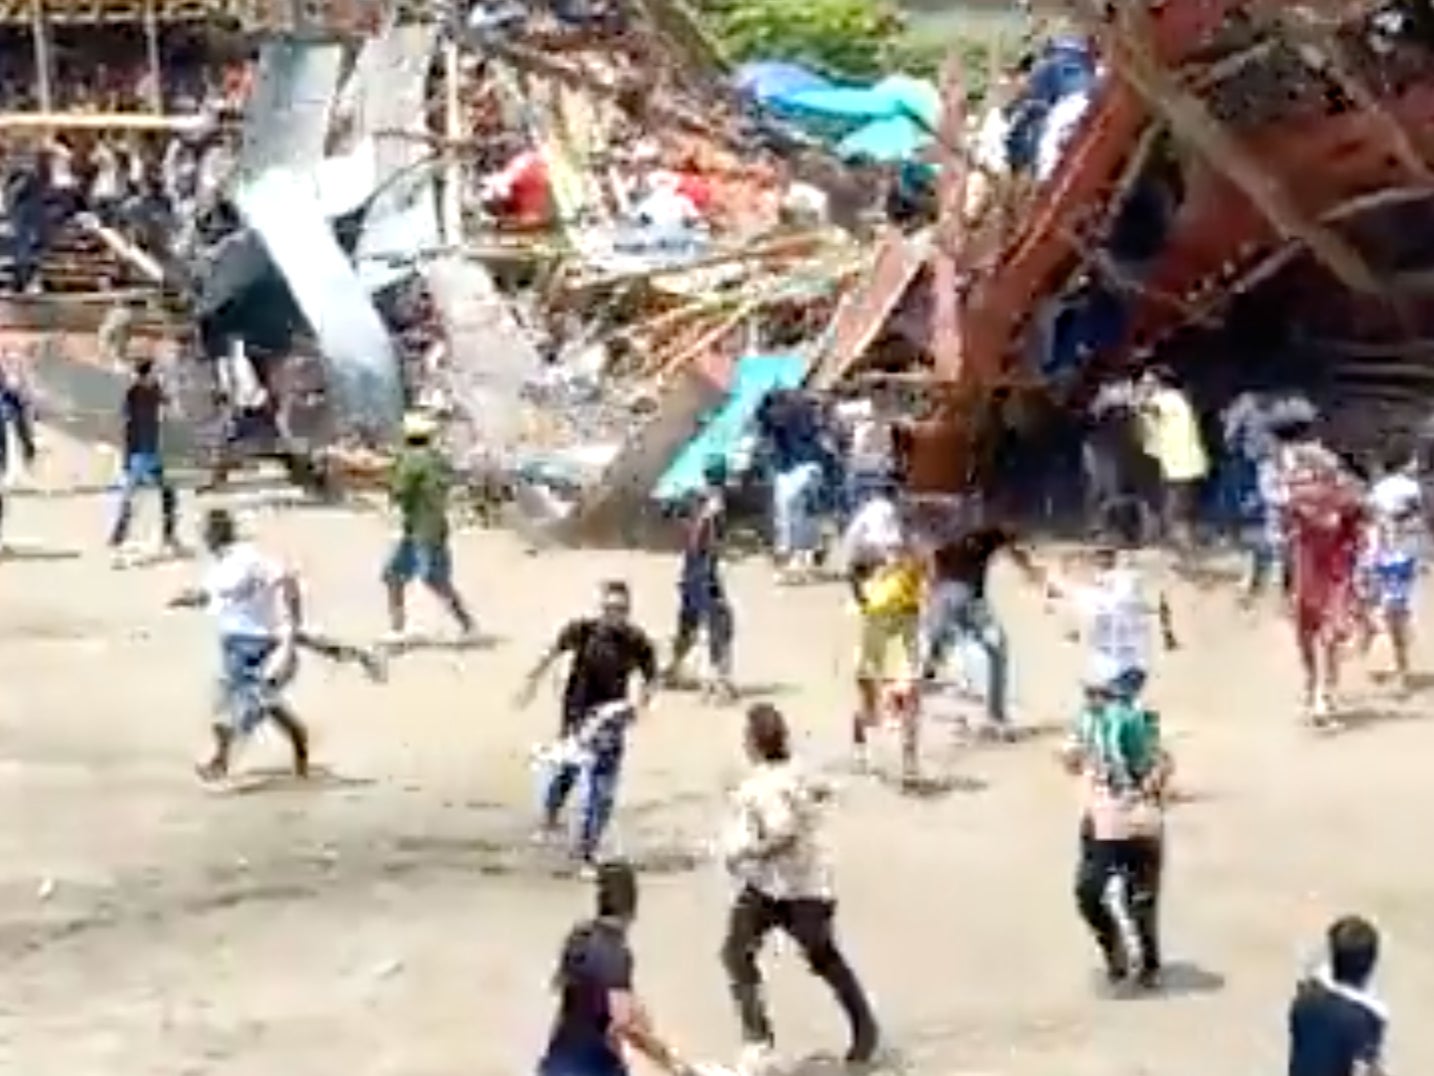 A video shared on social claims to capture the moment the structure collapsed